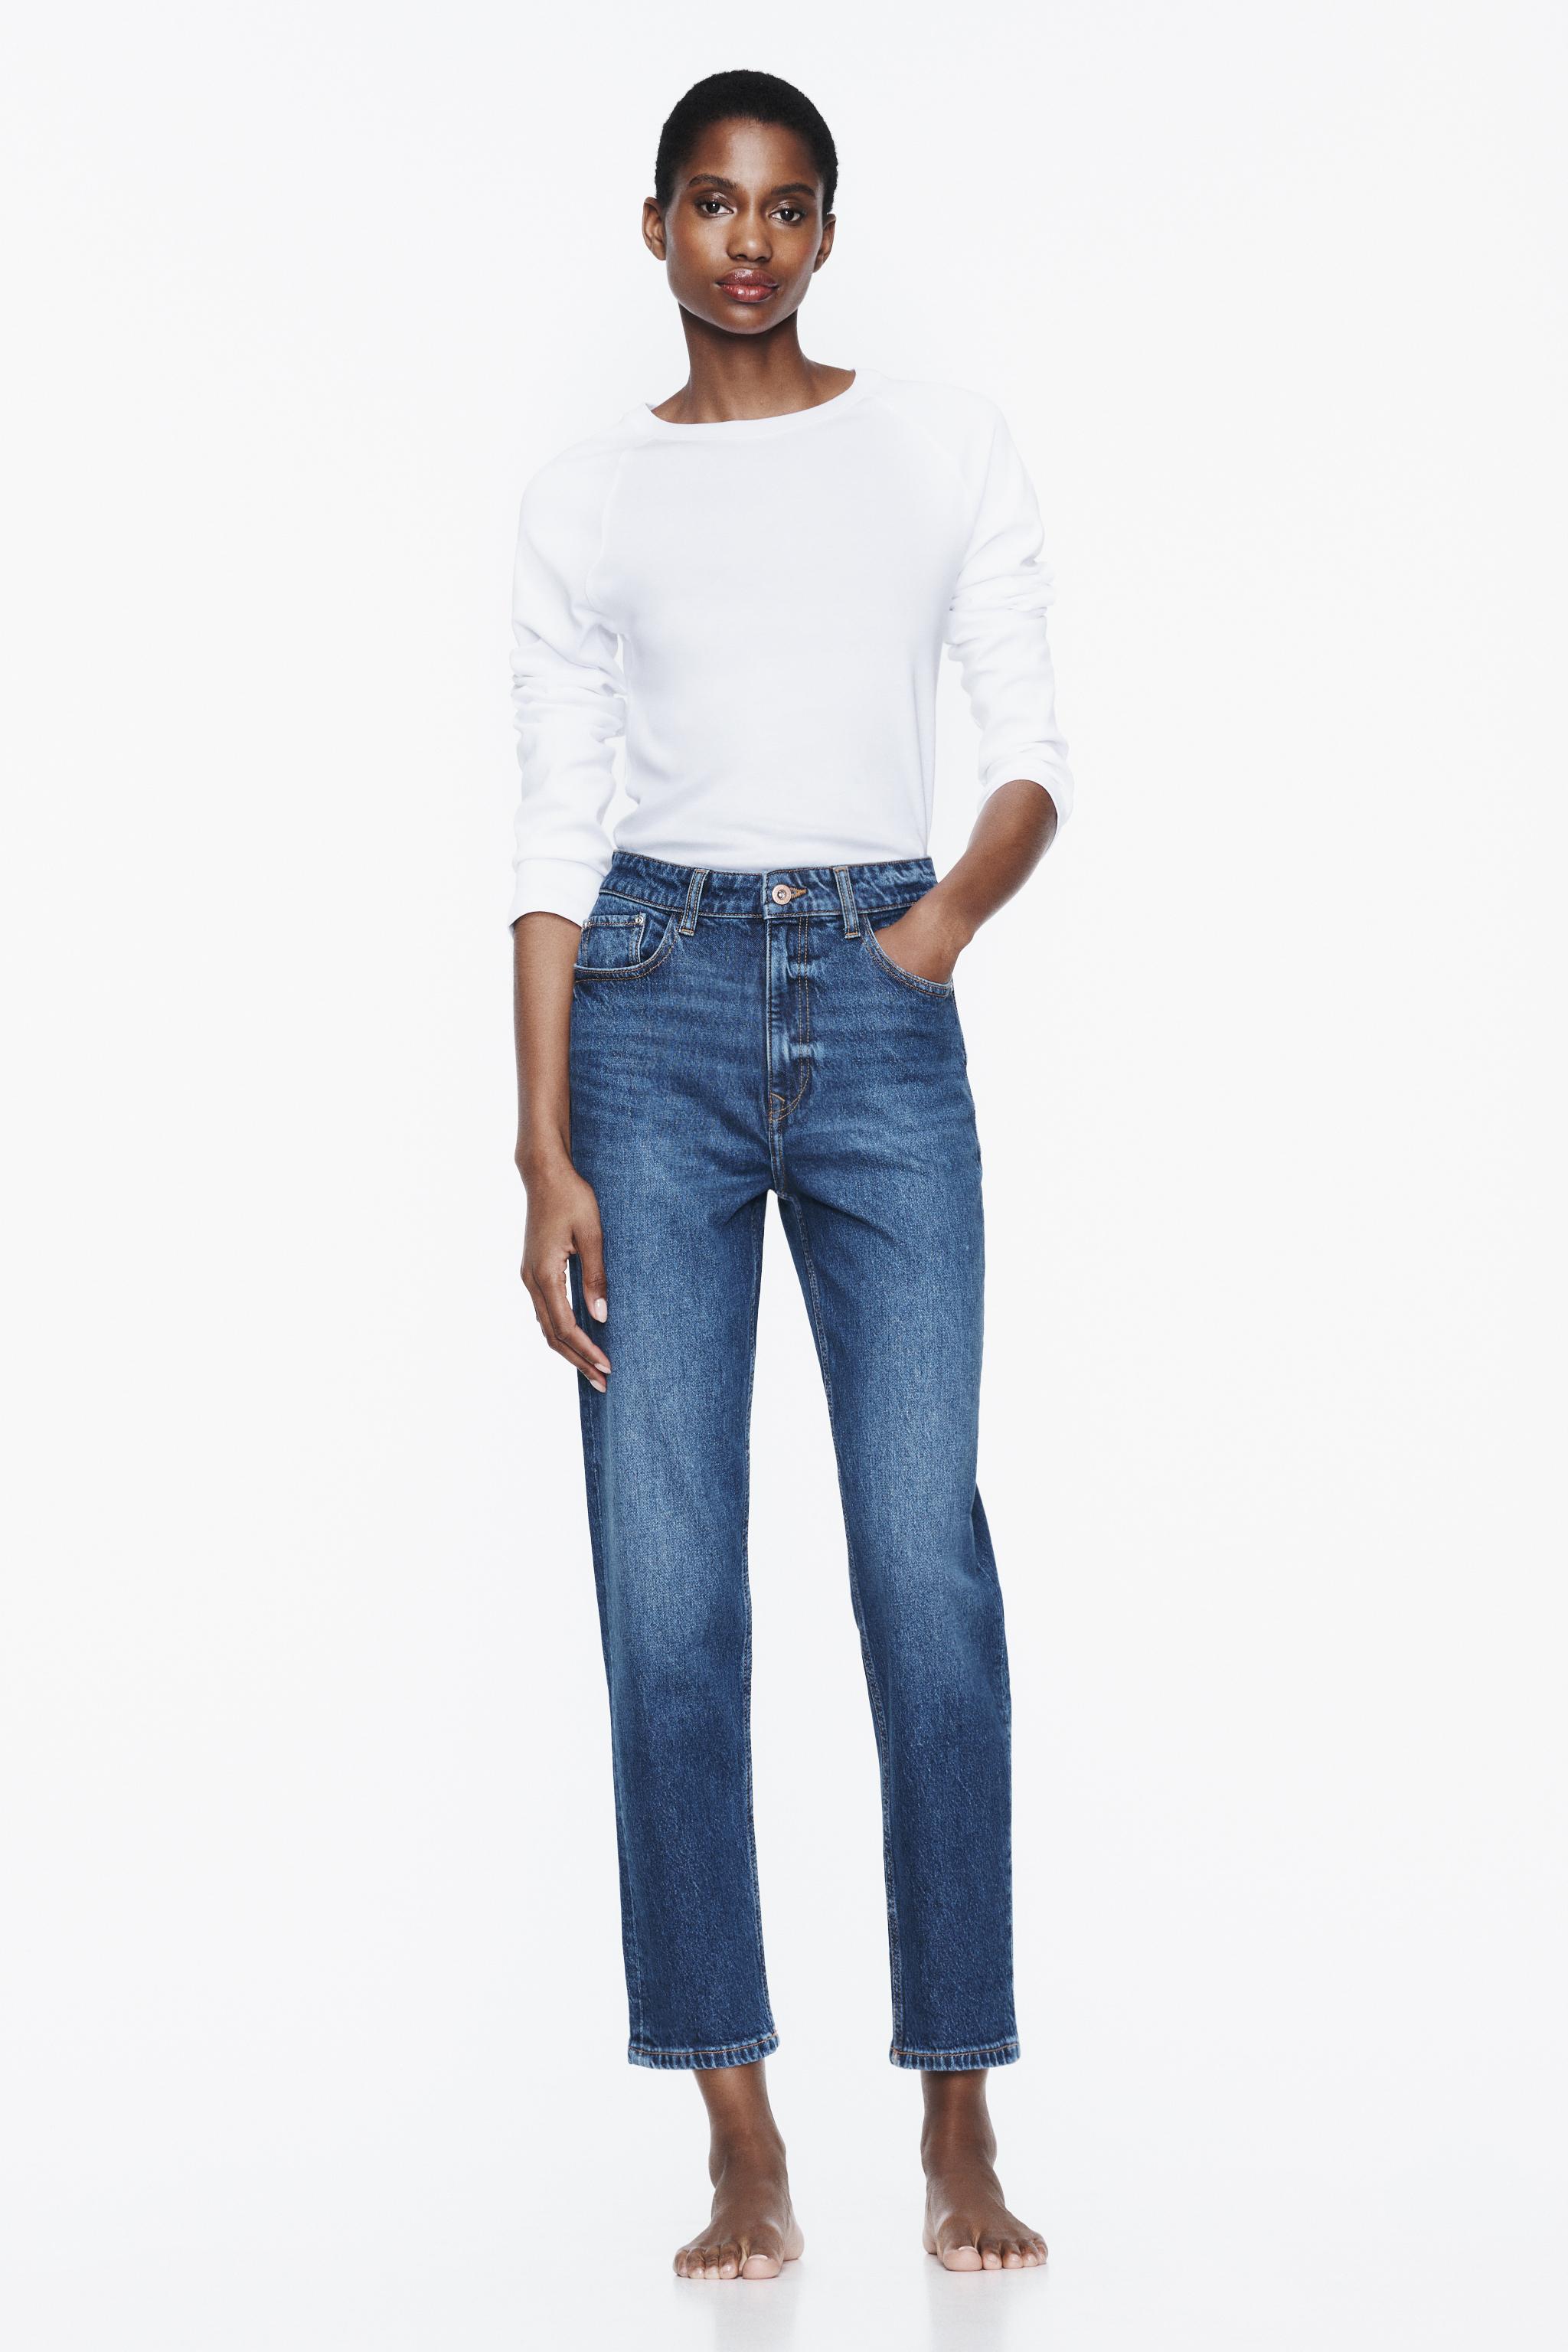 Zara Jeans Try On, Under 5' 3 for Petites